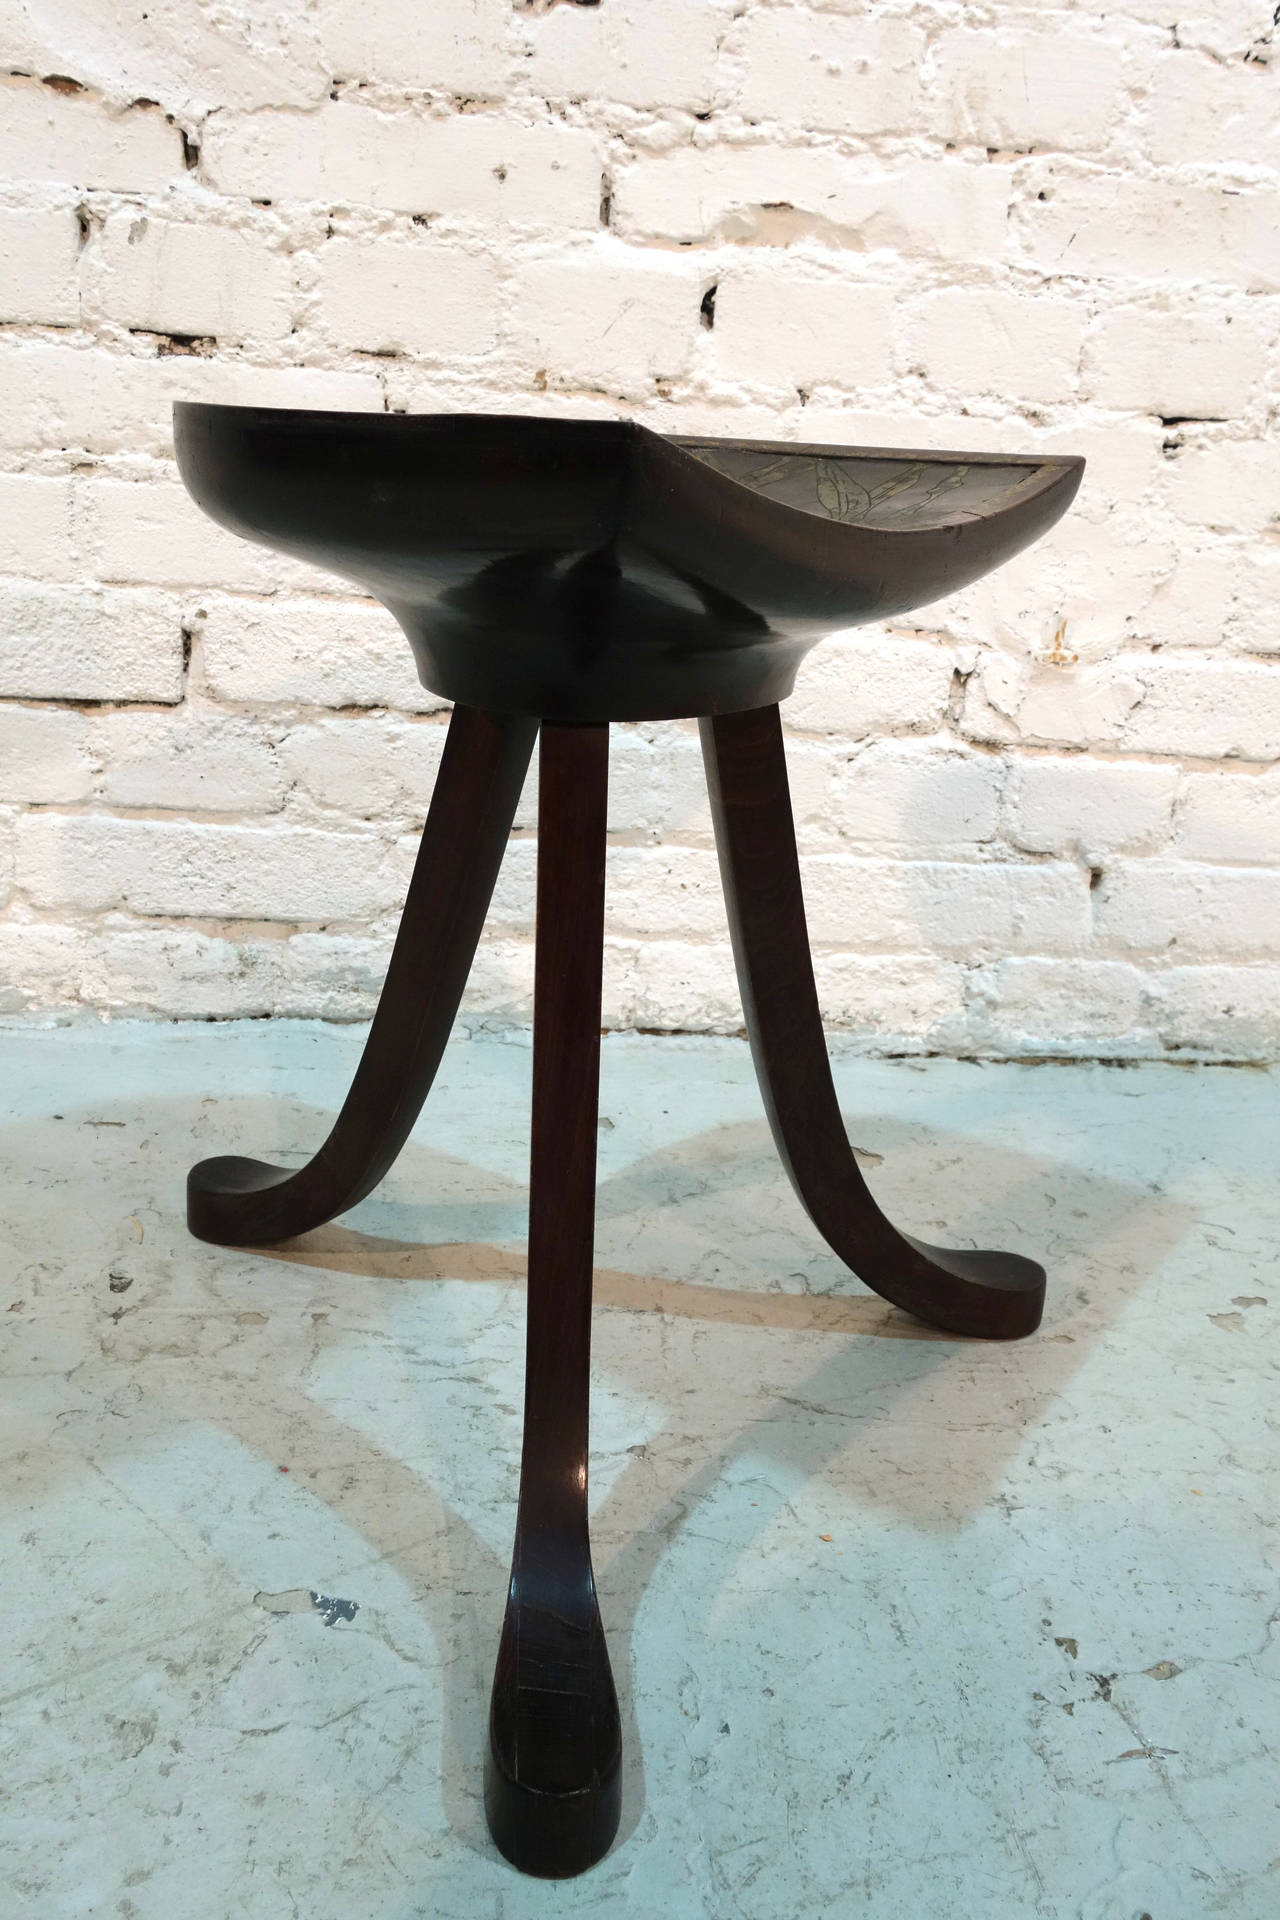 Three-legged stool in wood and leather. 
Design and manufacturing attributed to Leonard F. Wyburd for Liberty & Co.
Wooden structure in solid state.
Surface shows signs of wear consistant with the age (see pictures).
This three-legged stool was